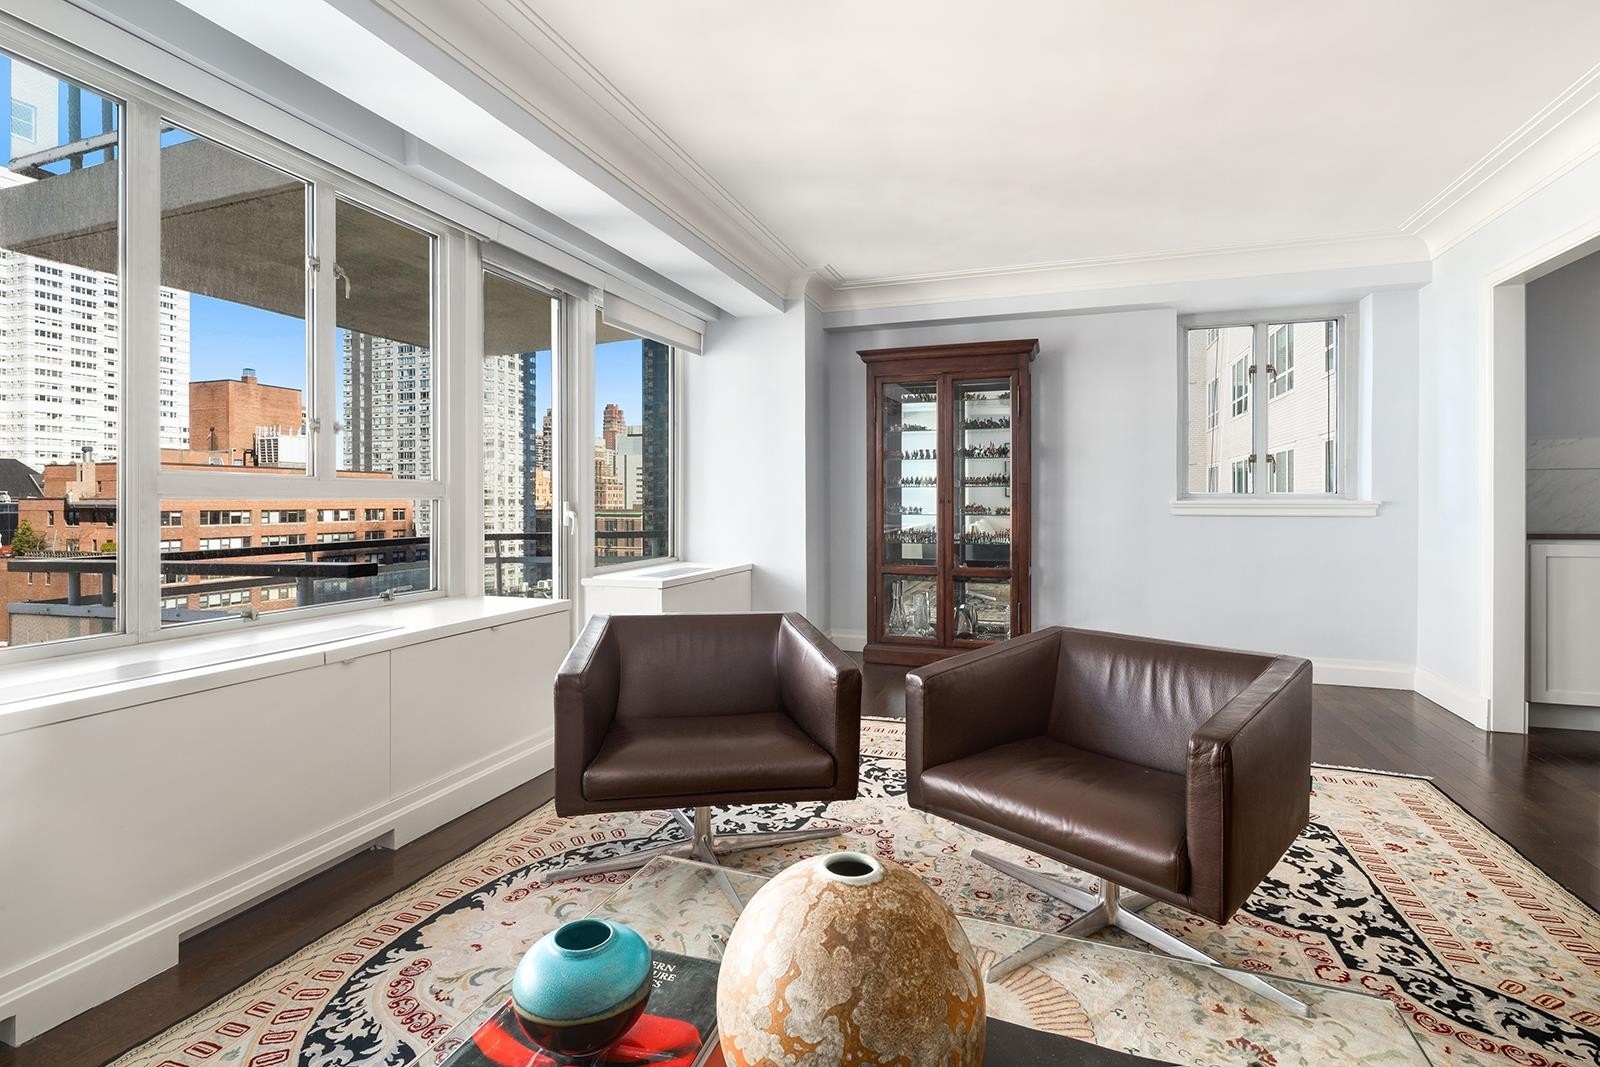 1. Condominiums for Sale at 200 E 66TH ST, A1407 Lenox Hill, New York, New York 10065